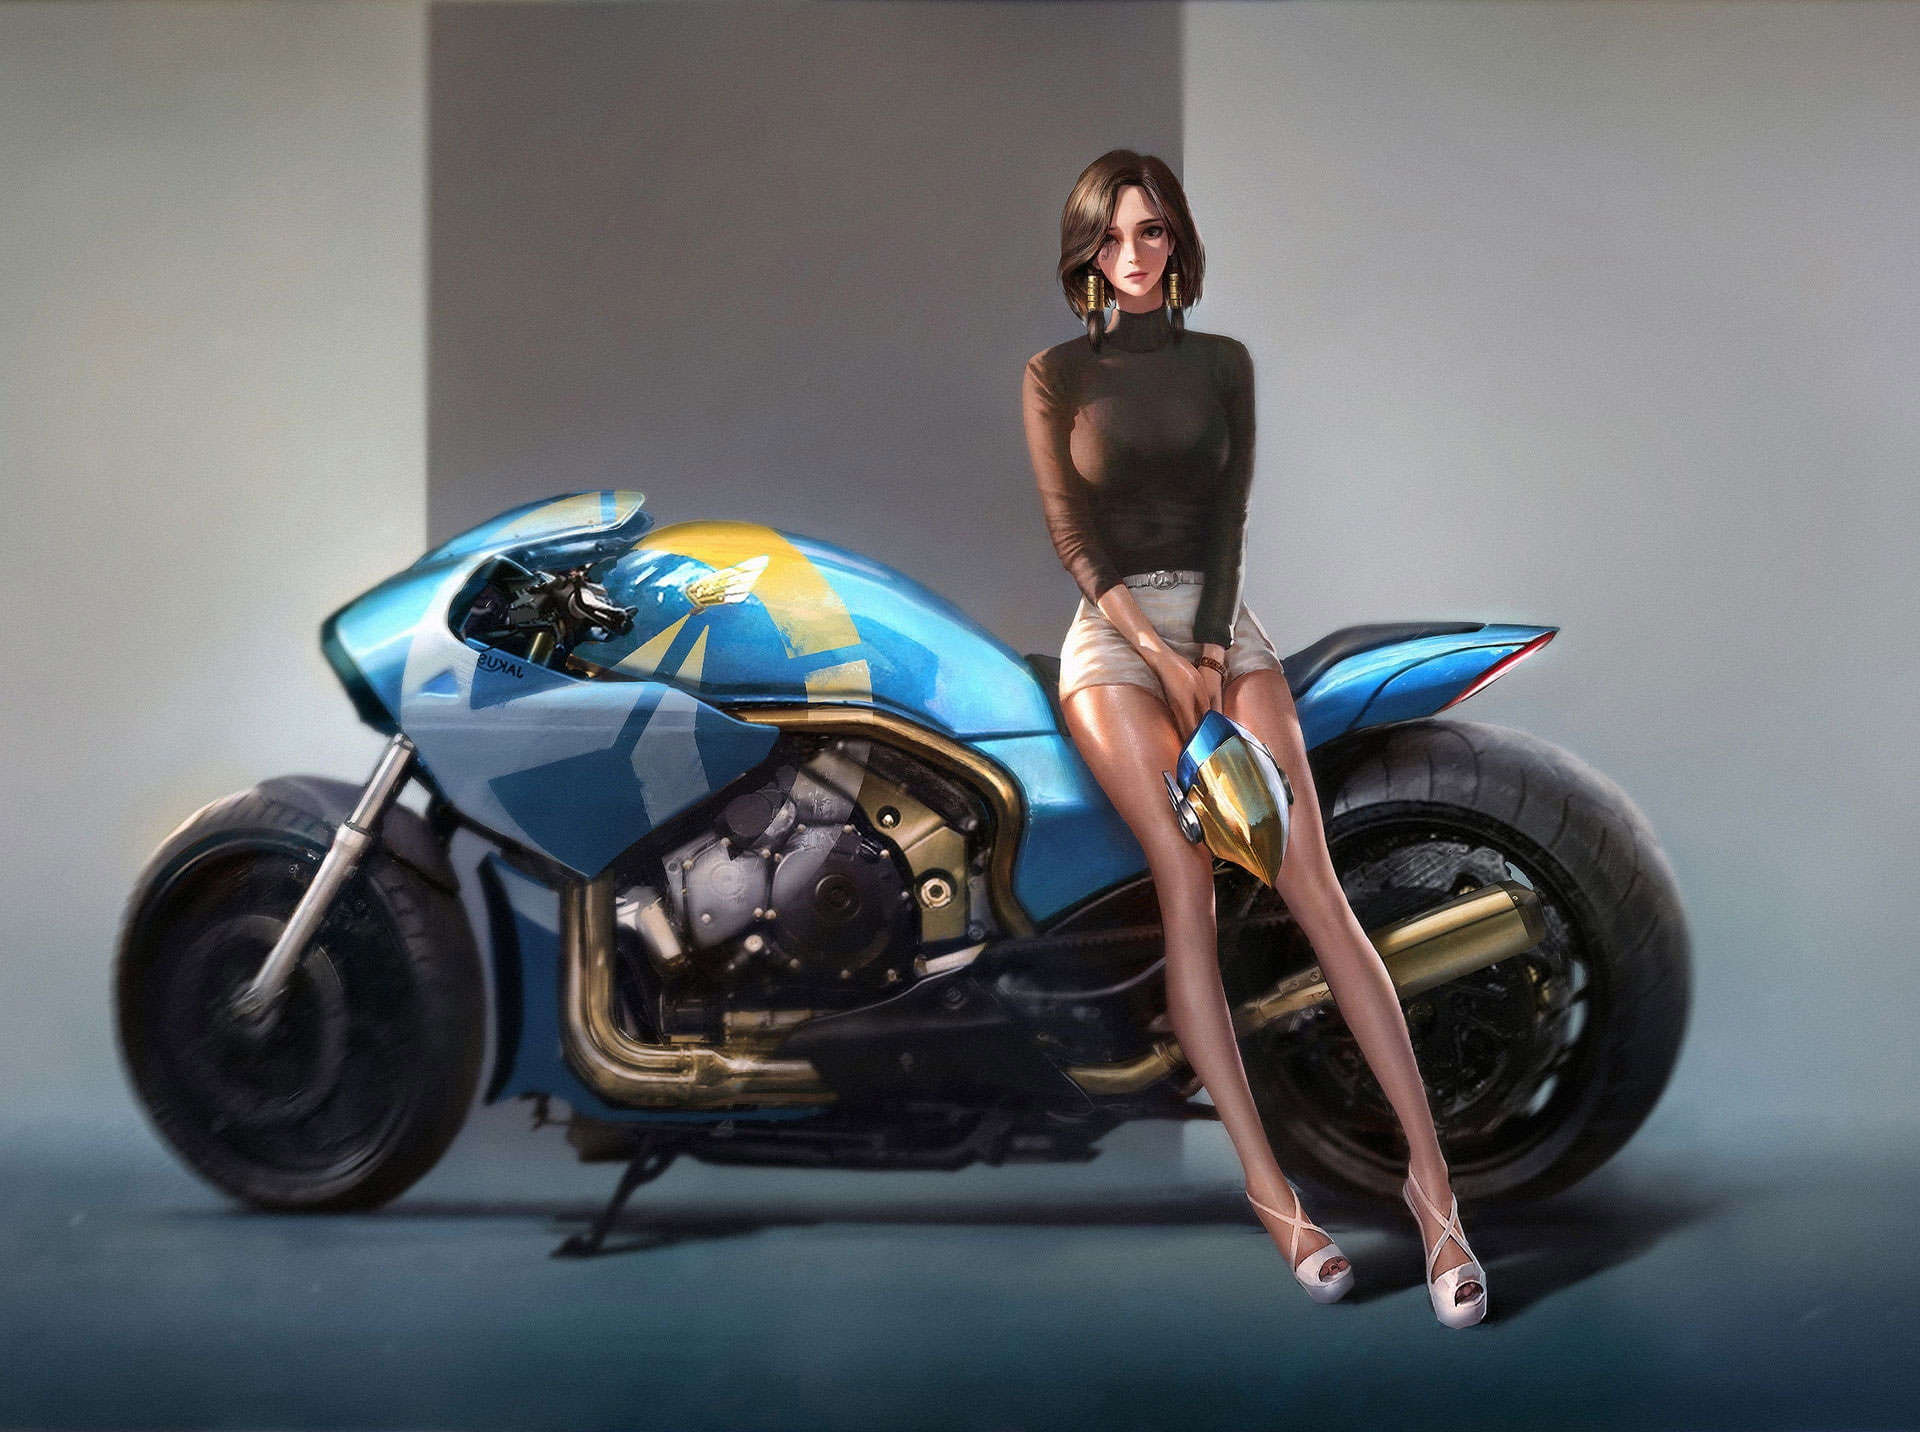 Overwatch wallpaper, Pharah (Overwatch), women with bikes, one person